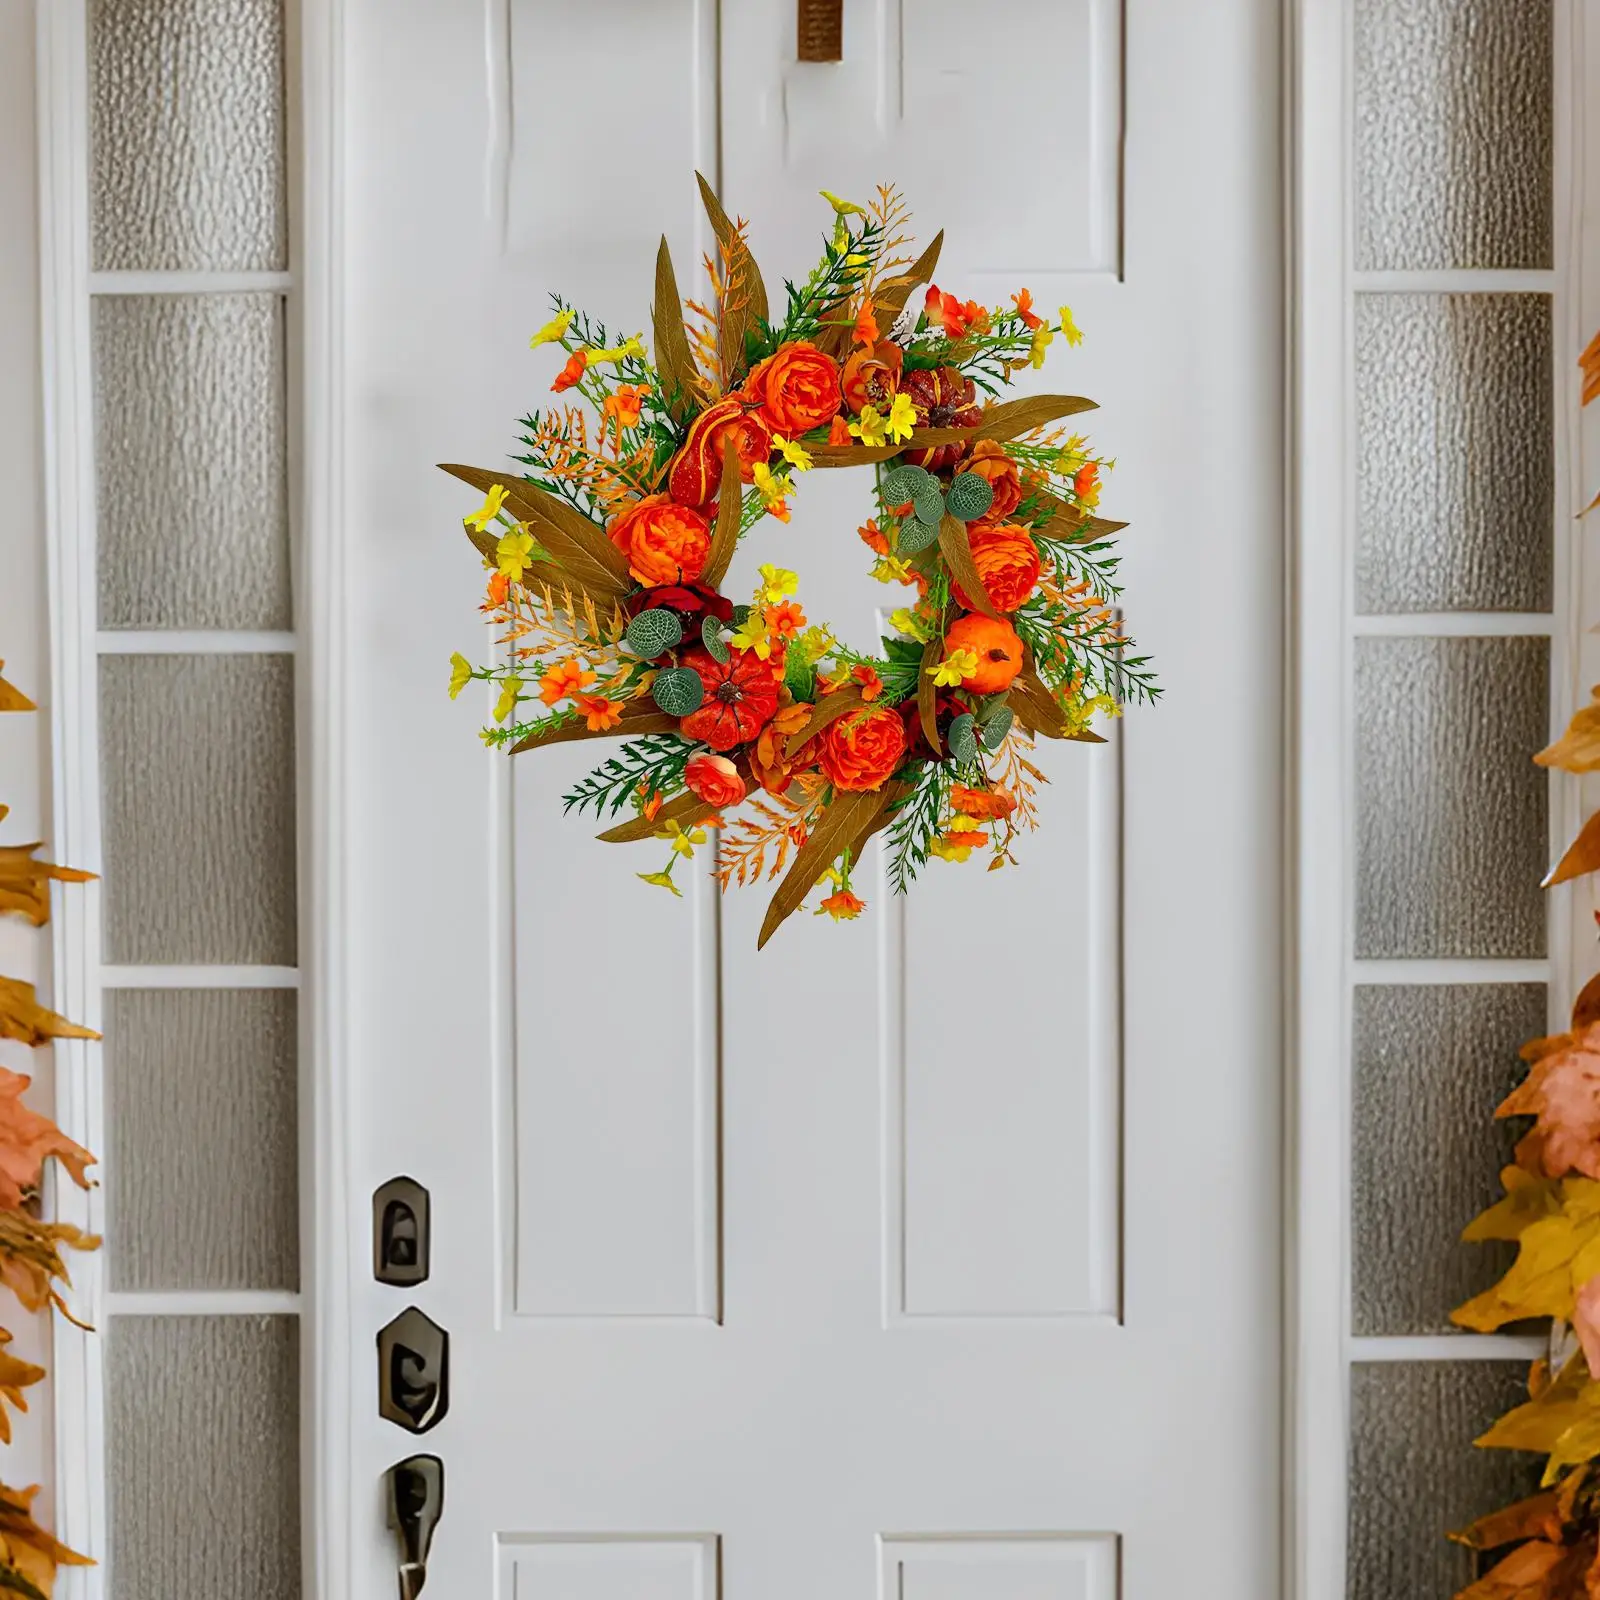 Pumpkin and Peony Wreath 17.72`` Round Wreaths Autumn Wreath Fall Wreath for Thanksgiving Wedding Arch Holiday Home Decoration